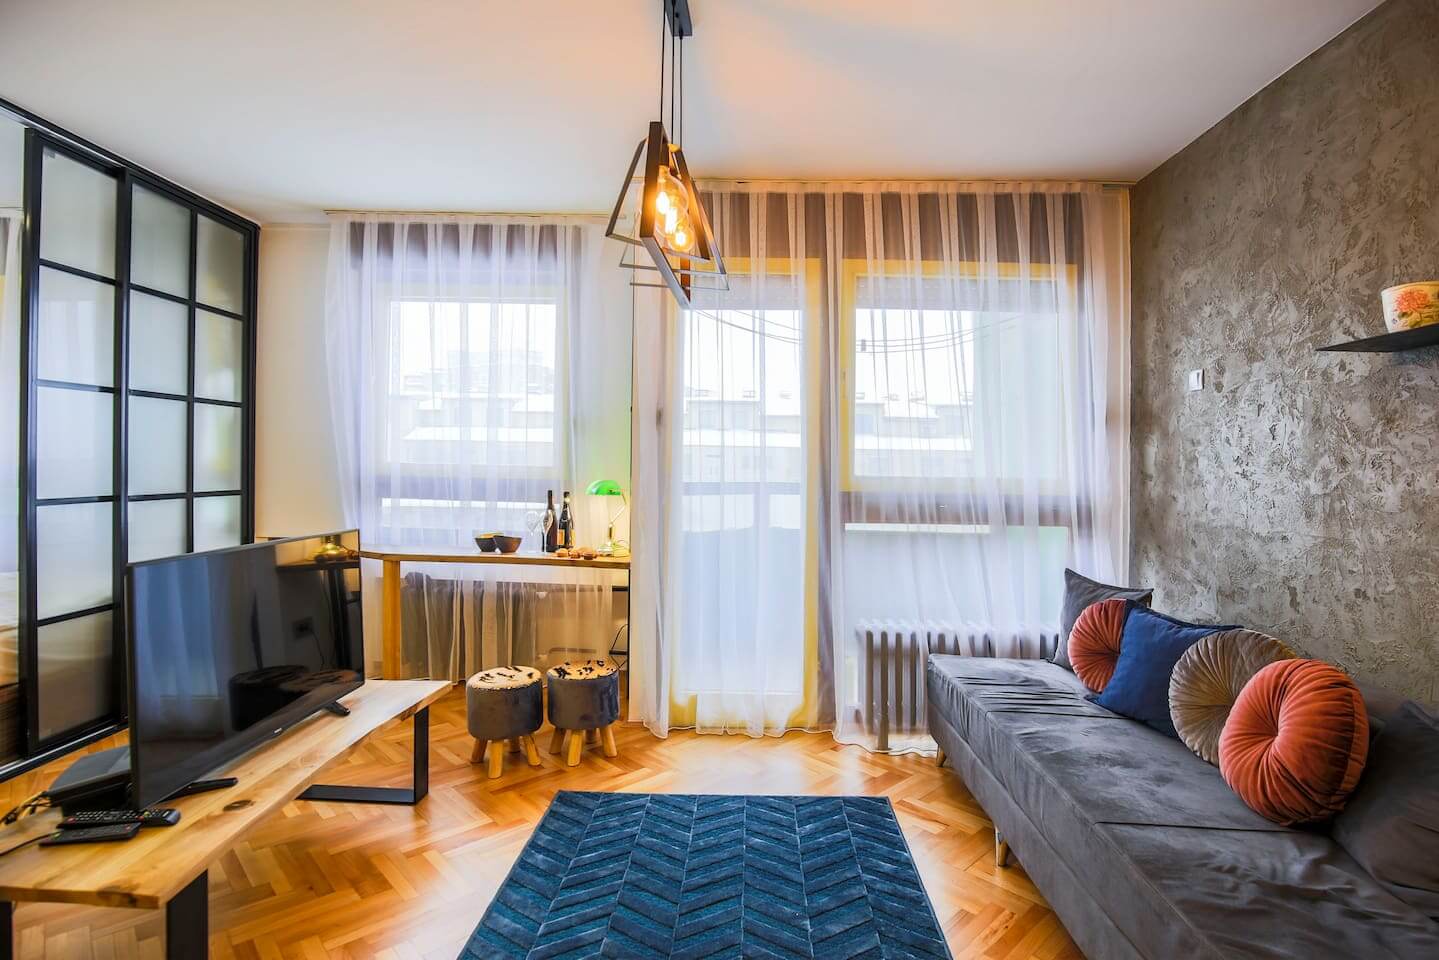 Apartments for rent in Pristina: what to consider before leasing post thumbnail image